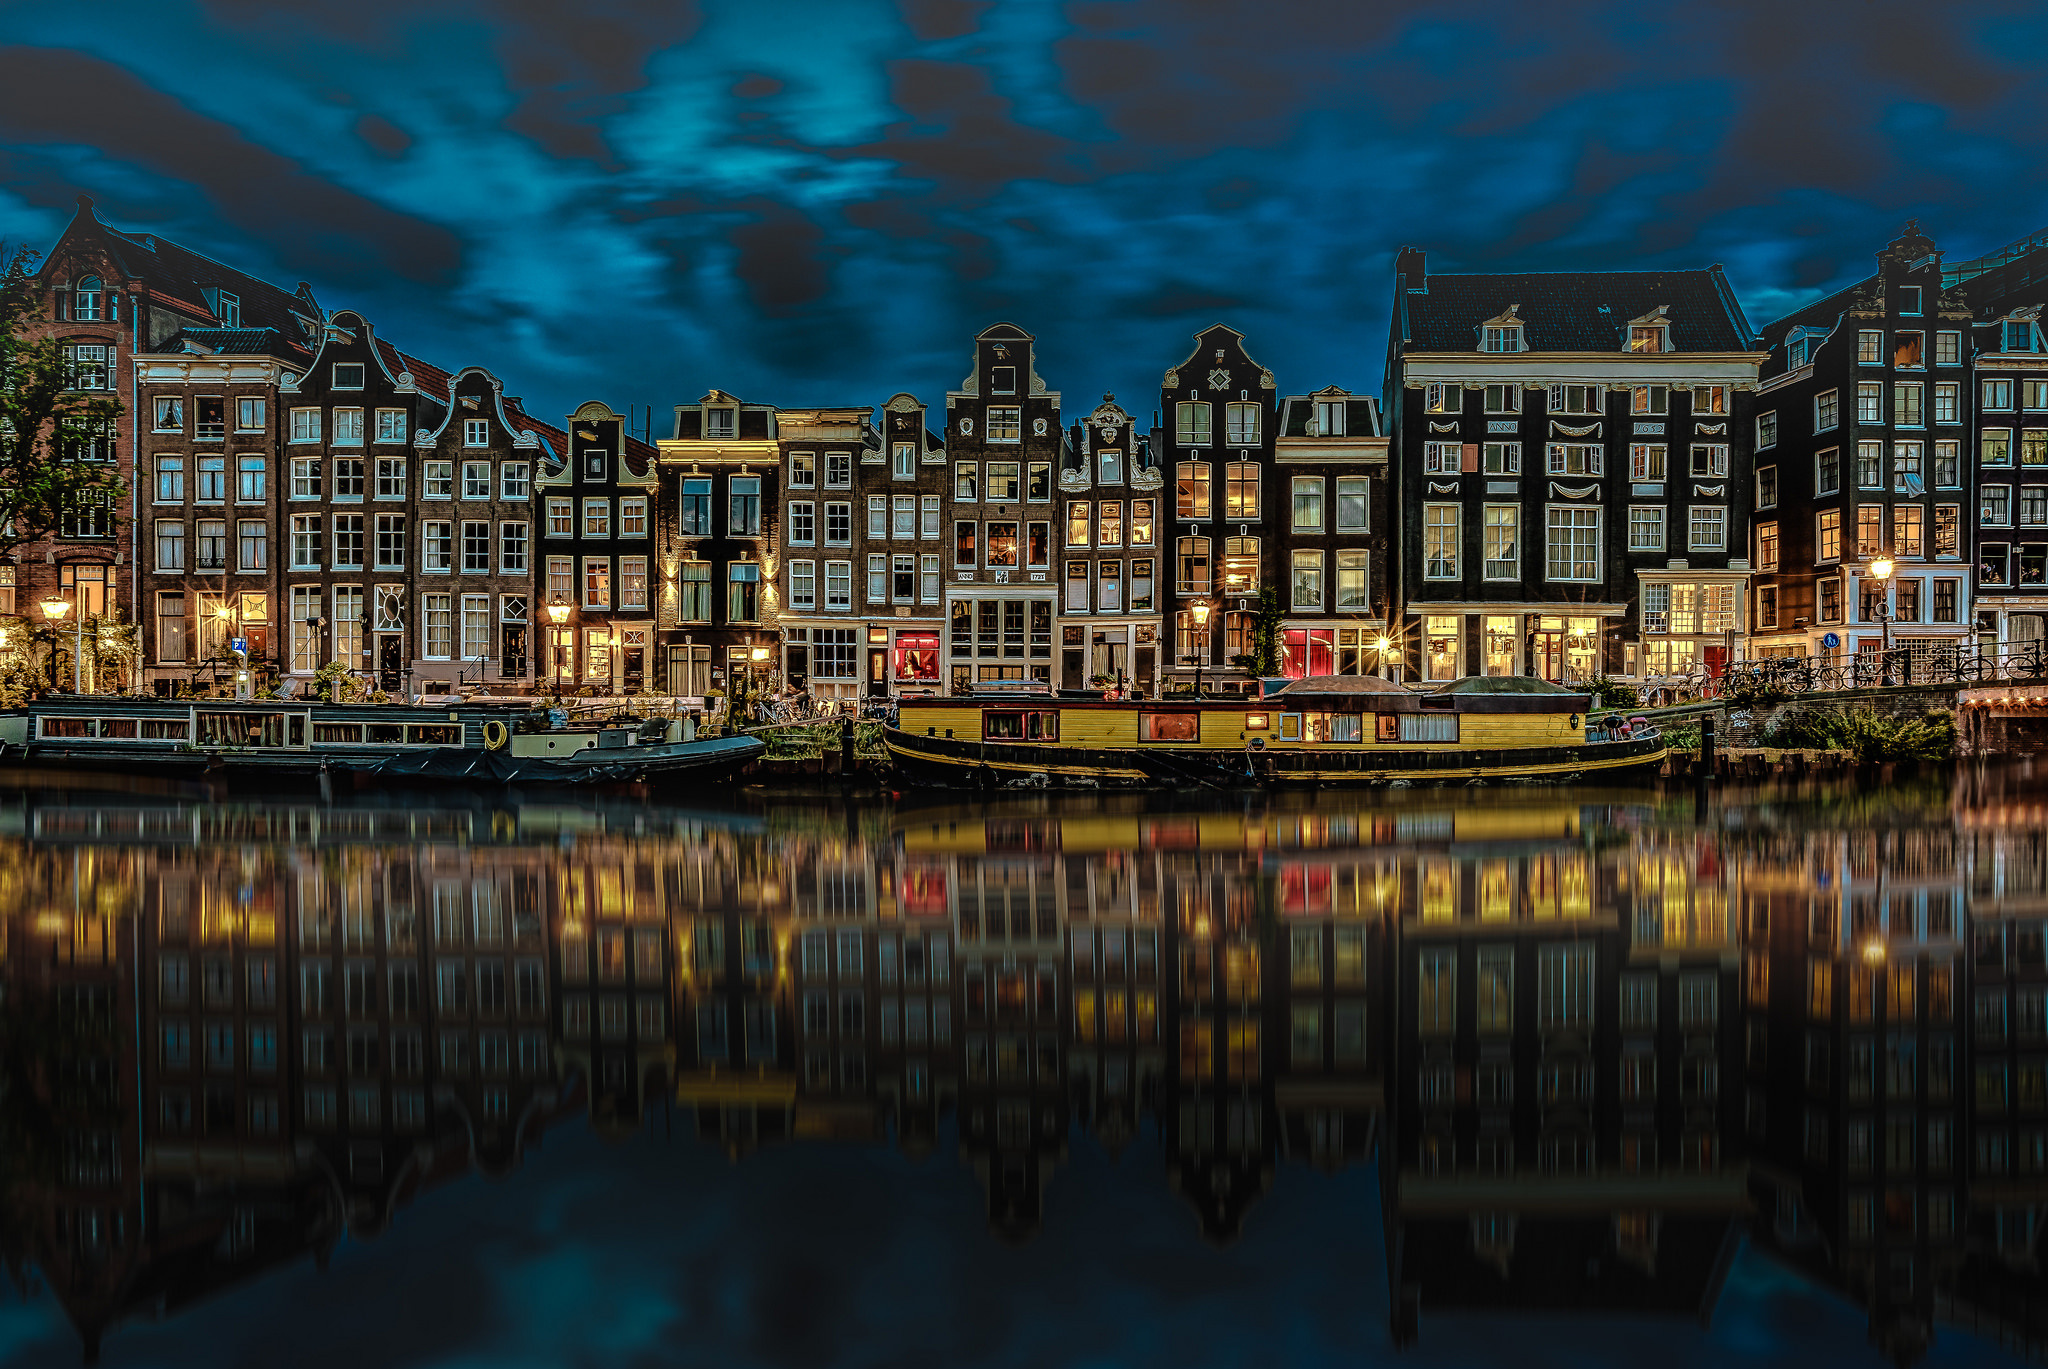 amsterdam, man made, building, canal, house, night, reflection, cities